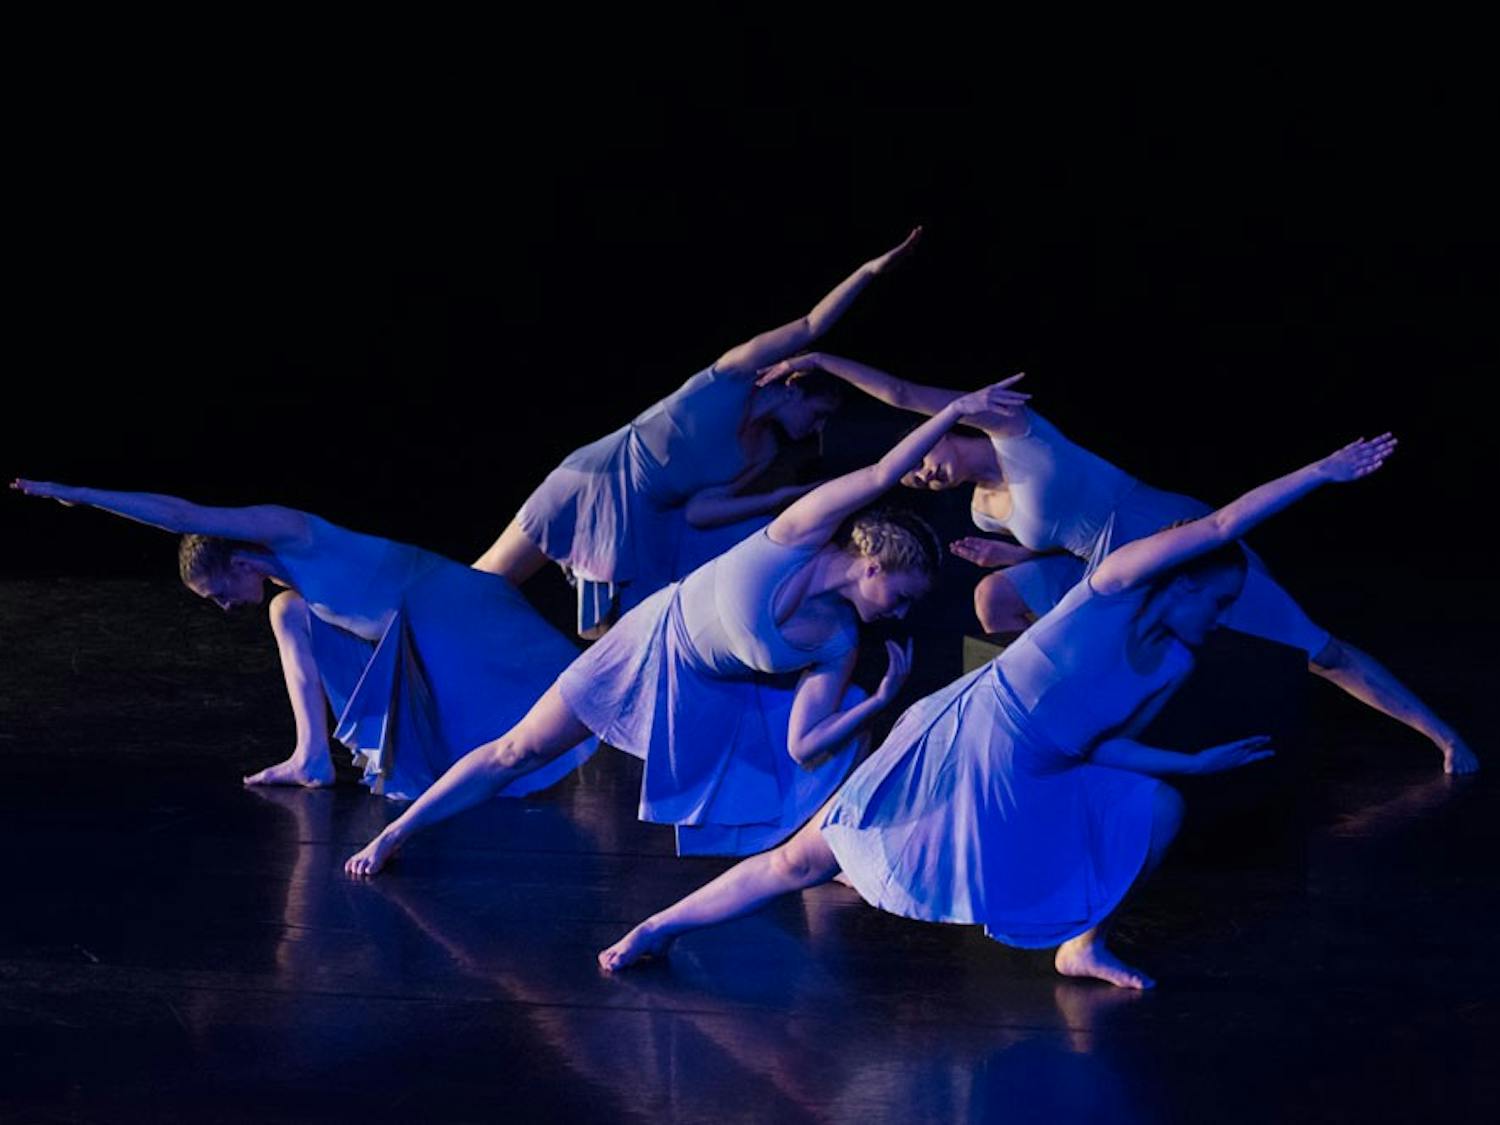 The Zodiaque Dance Company’s spring semester performance was held last week and weekend. The dancers exhibited a number of diverse styles and forms throughout the show, representing the culmination of a semester-long effort.